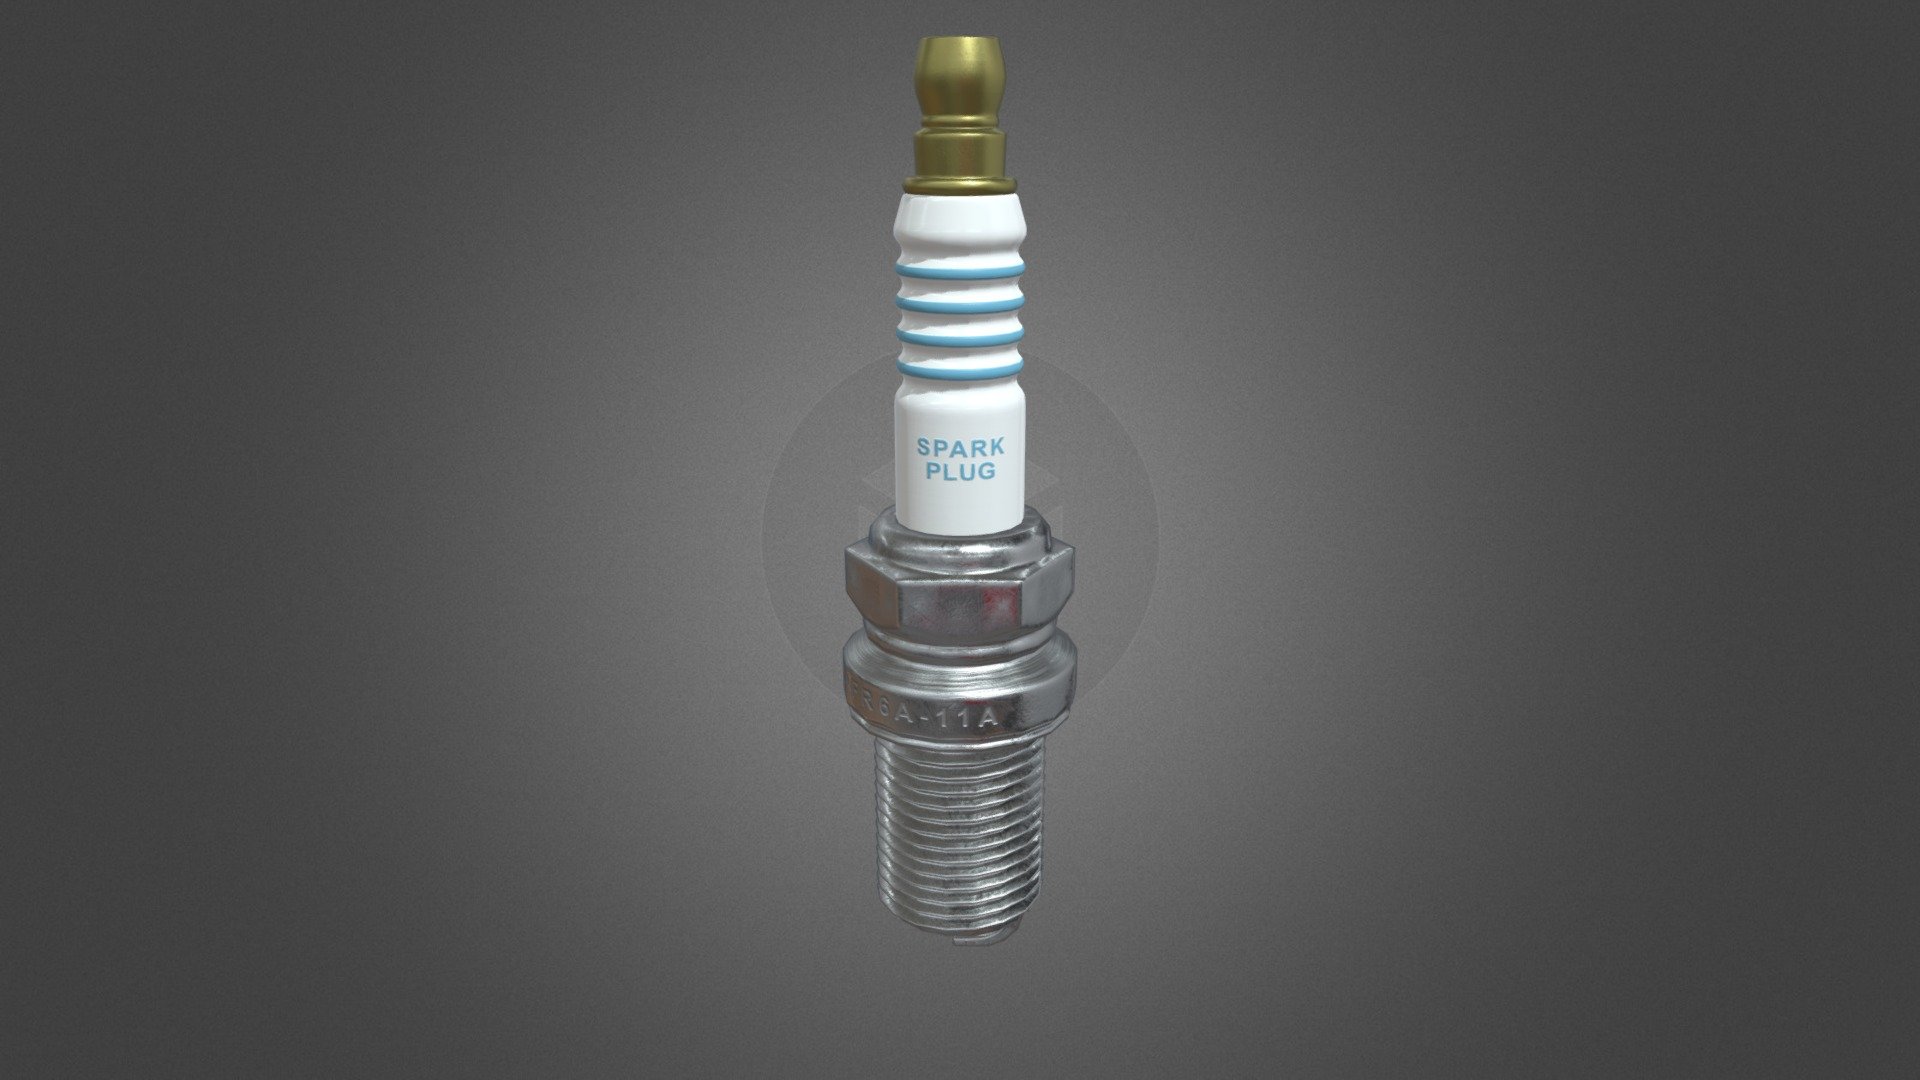 Low-Poly Game-Ready 3D Model of Brand-New Spark Plug with 2K PBR-Texture set. You can find it on Astastation and on some 3D stocks 3d model